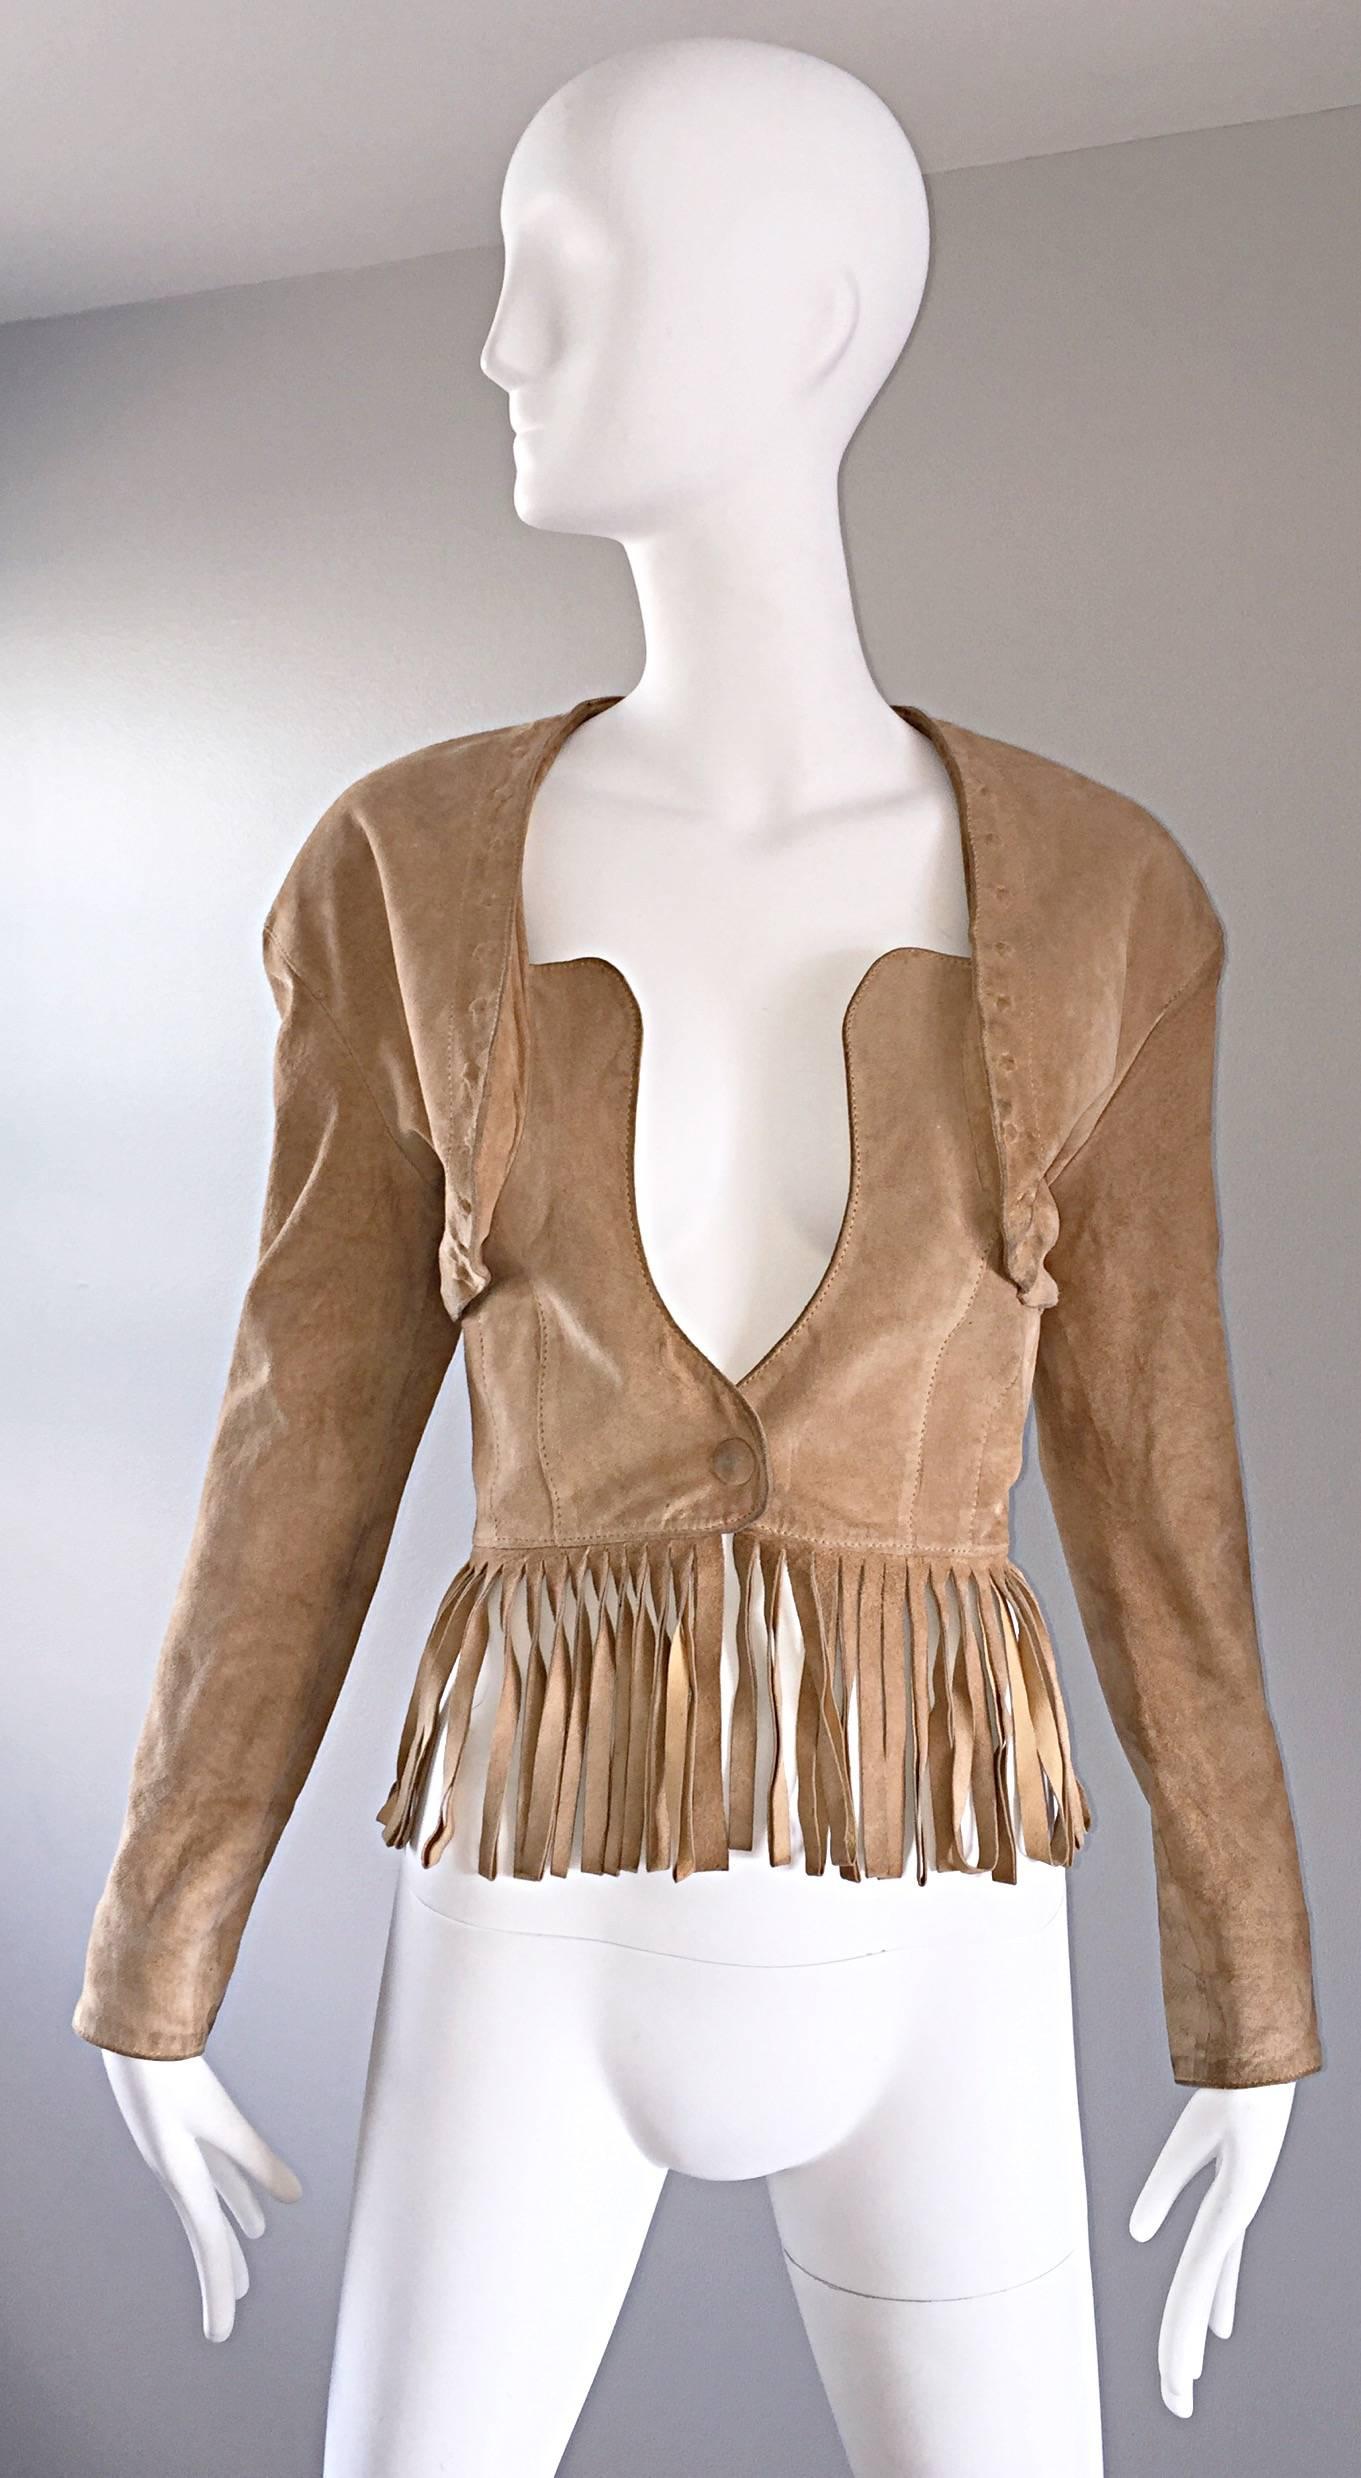 Amazing vintage 90s JEAN CLAUDE JITROIS tan / beige leather suede fringe jacket! Features a fringed hem across the front and back. Bustier style closure. Wonderful fitted bodice with tailore sleeves. Snap at waist and at each sleeve cuff. Fully